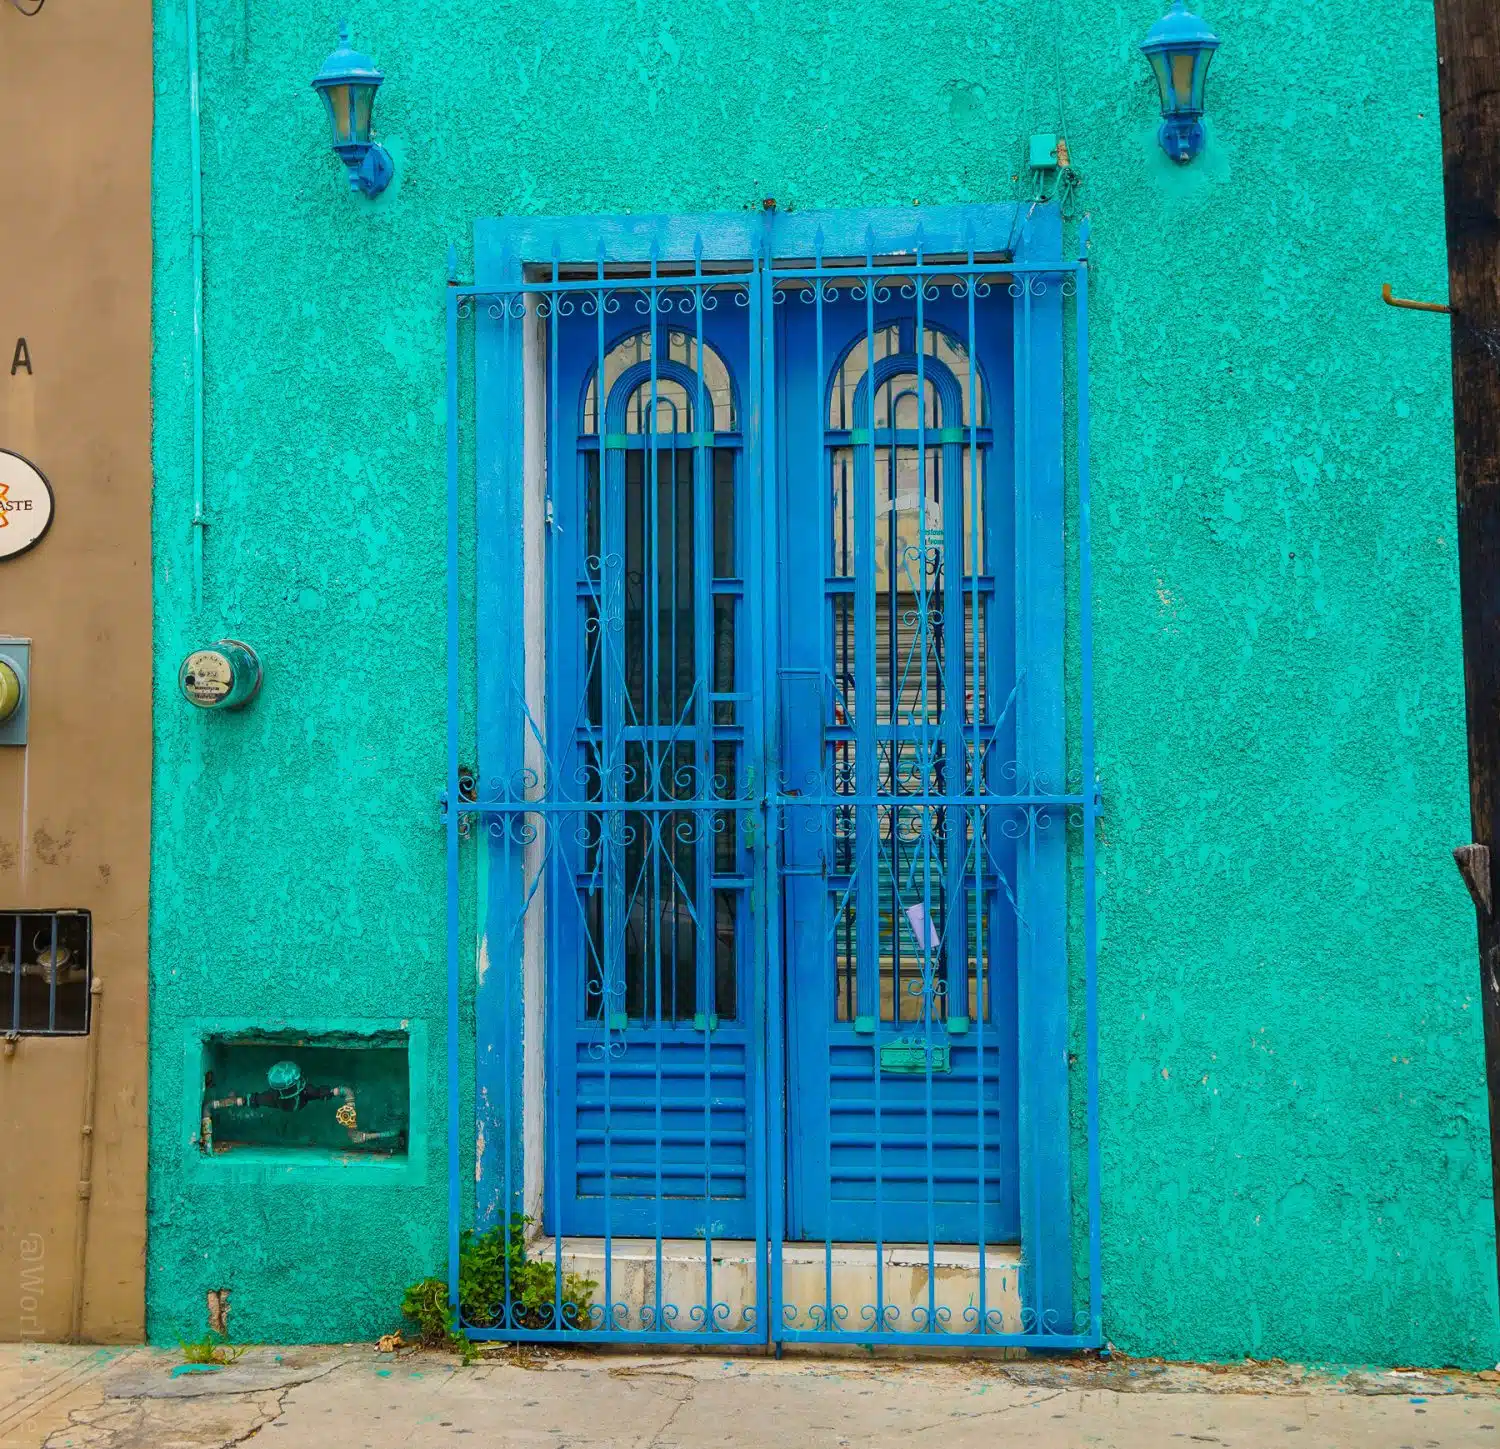 What a cheerful blue door and wall!